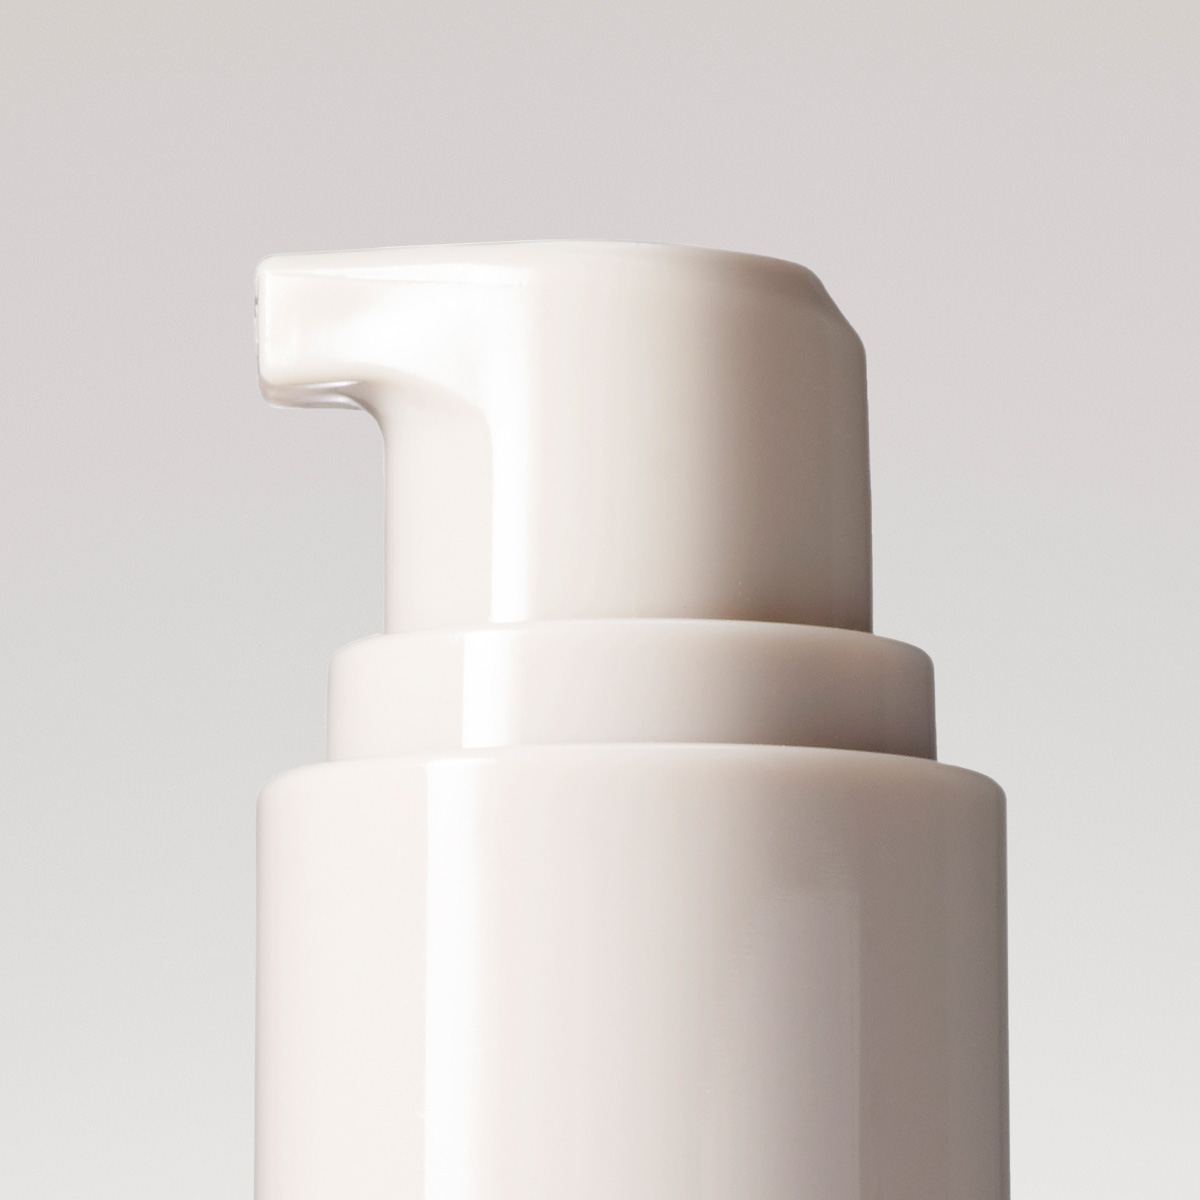 Zoomed in image of the pump on the serum